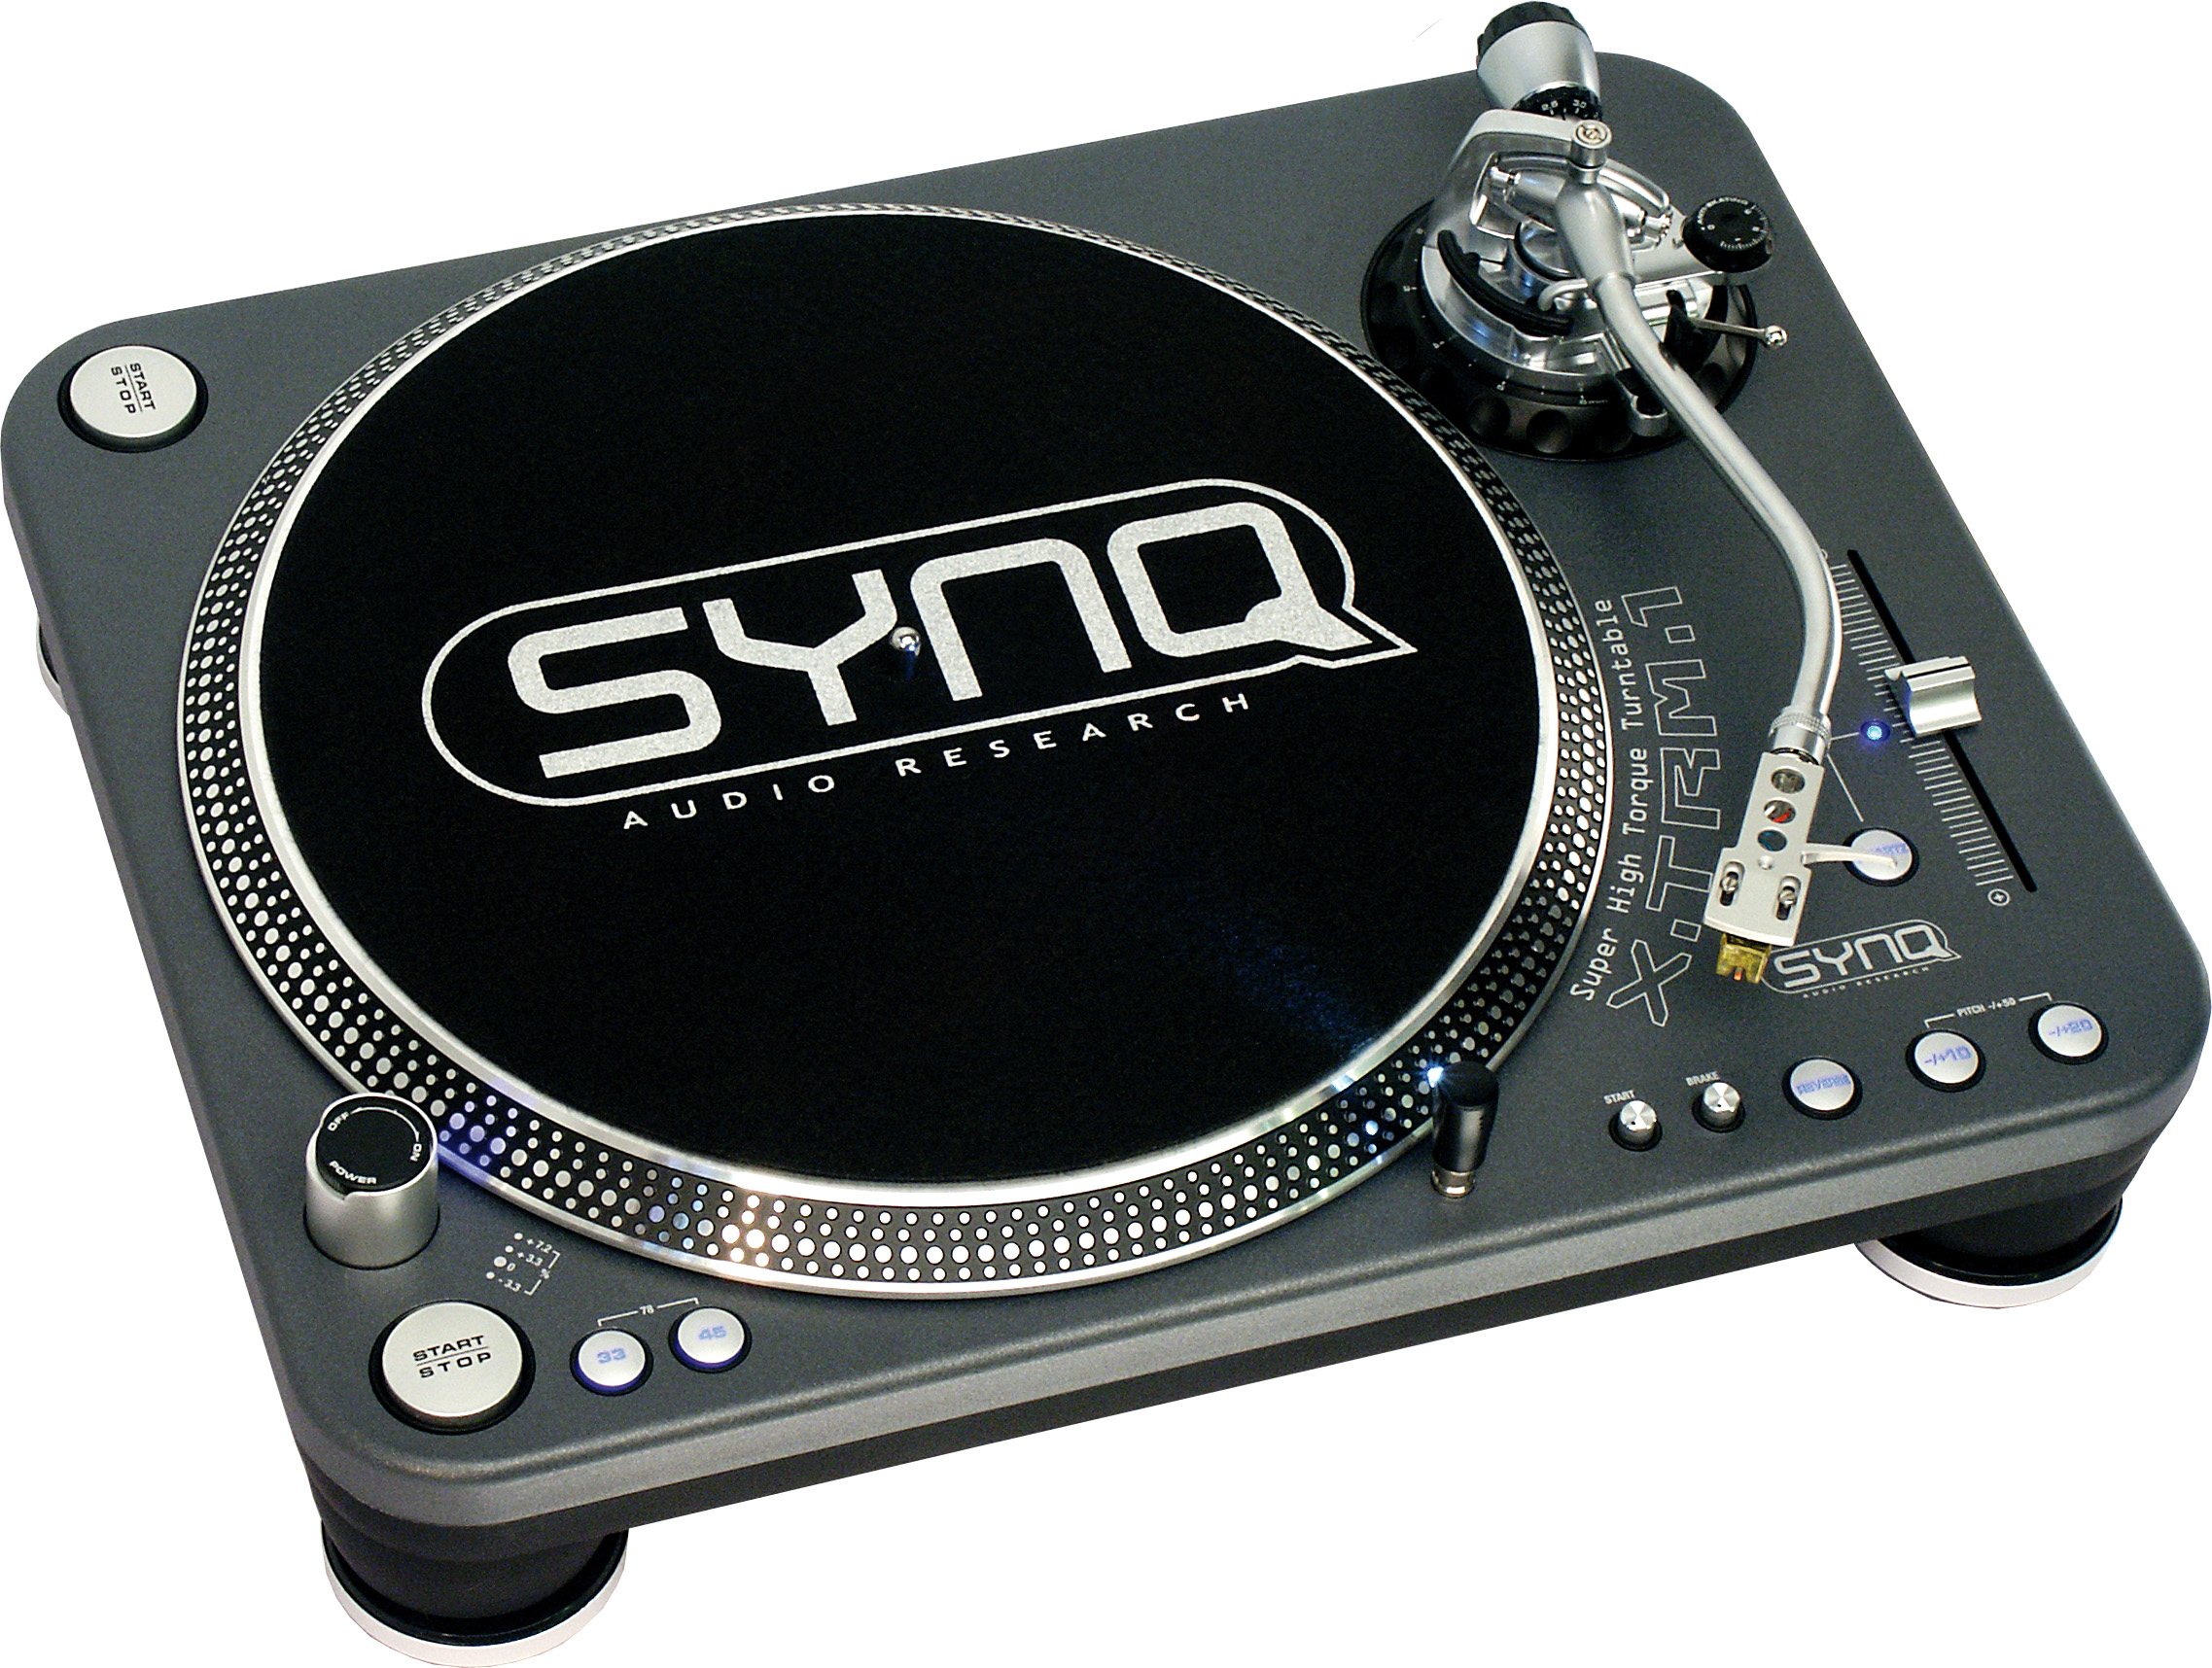 Professional High Torque Direct Drive turntable